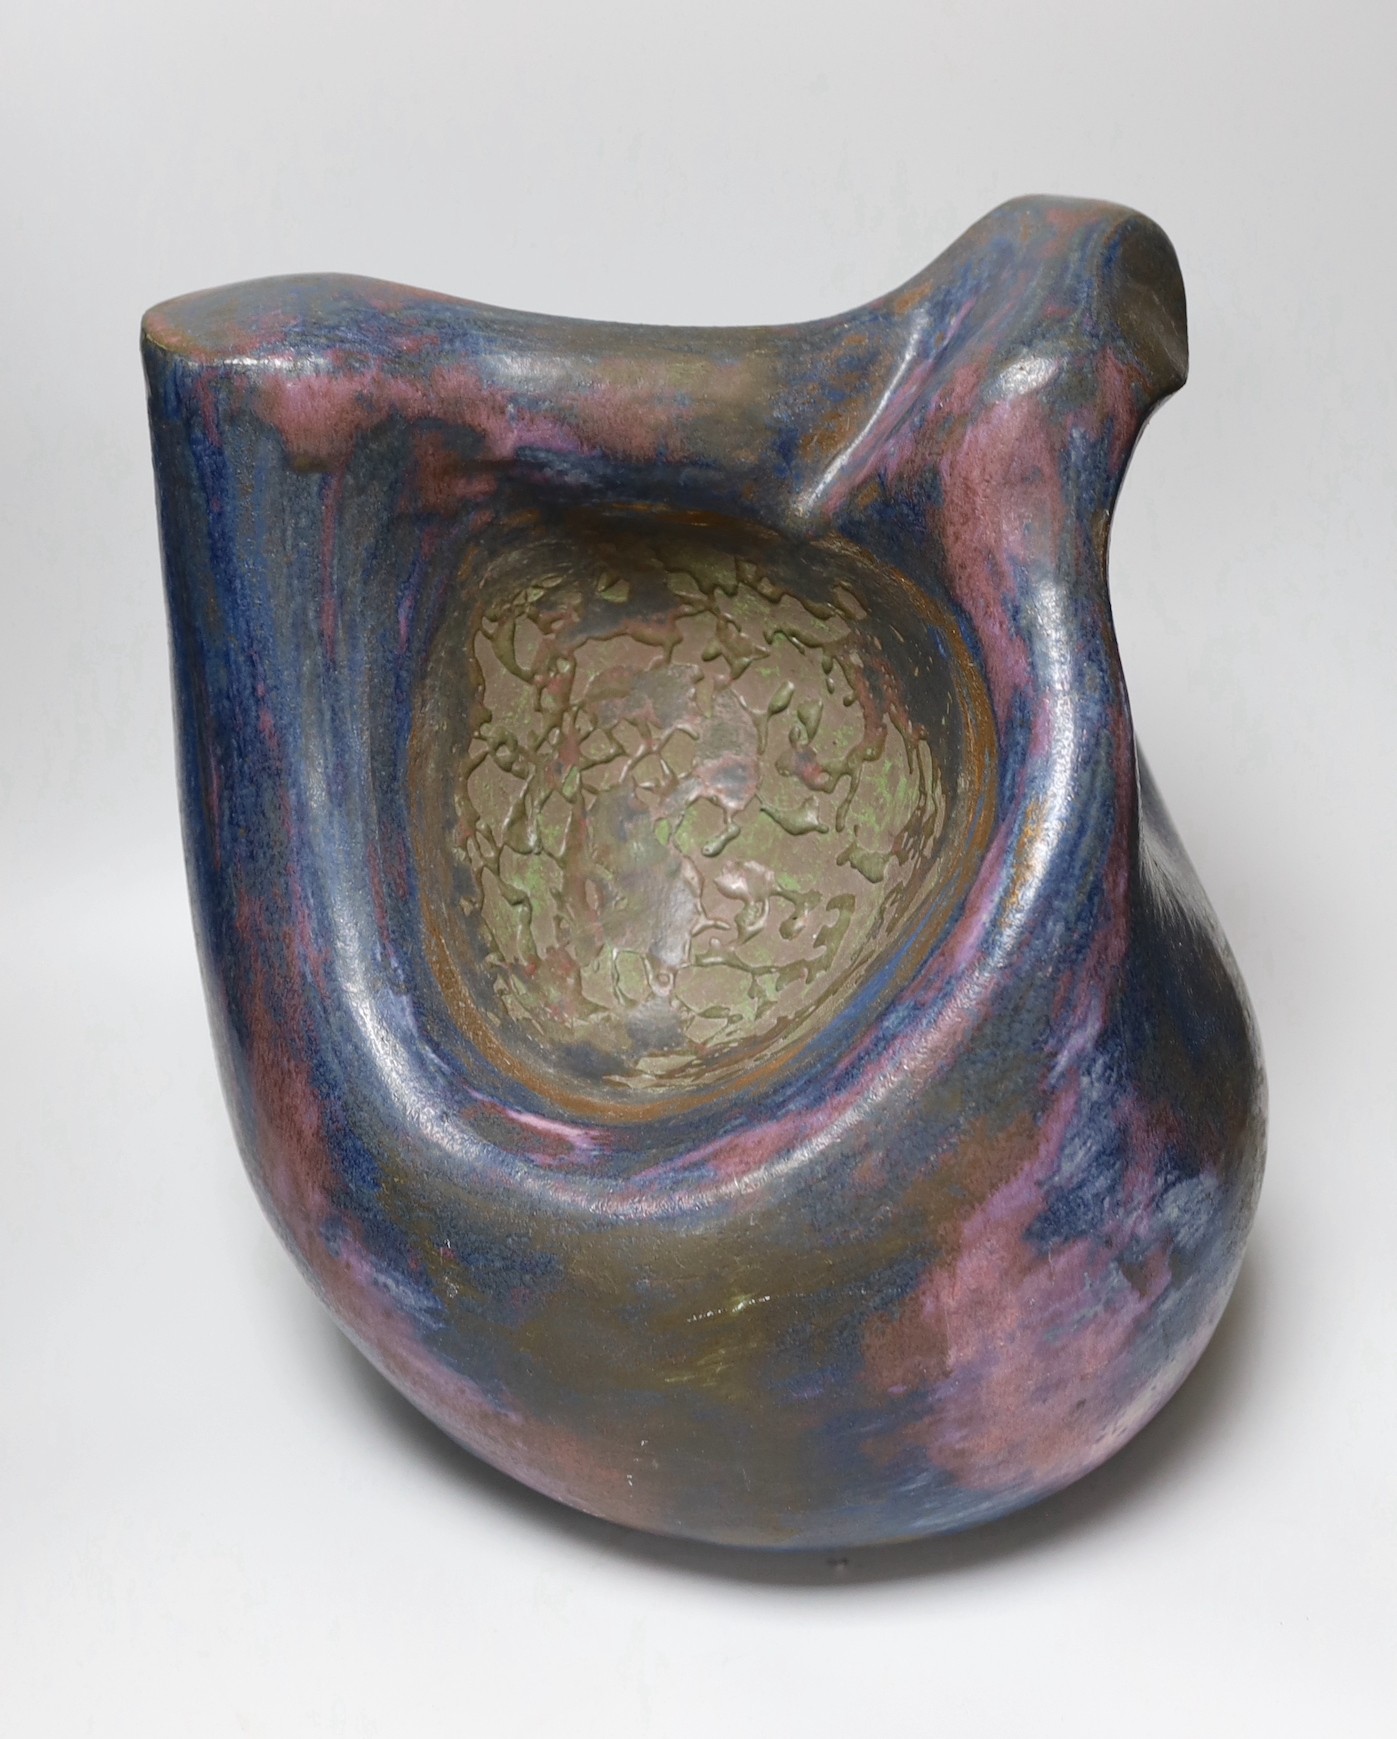 Ruth Sulke - a large studio purple and indigo nickel oxide glazed stoneware bulbous sculpture with flowing lines and hollows, 1985, 34cm, See Sulke, Ruth - Ceramic Sculpture by Ruth Sulke, Hanart 2 Gallery, 1987, page 24